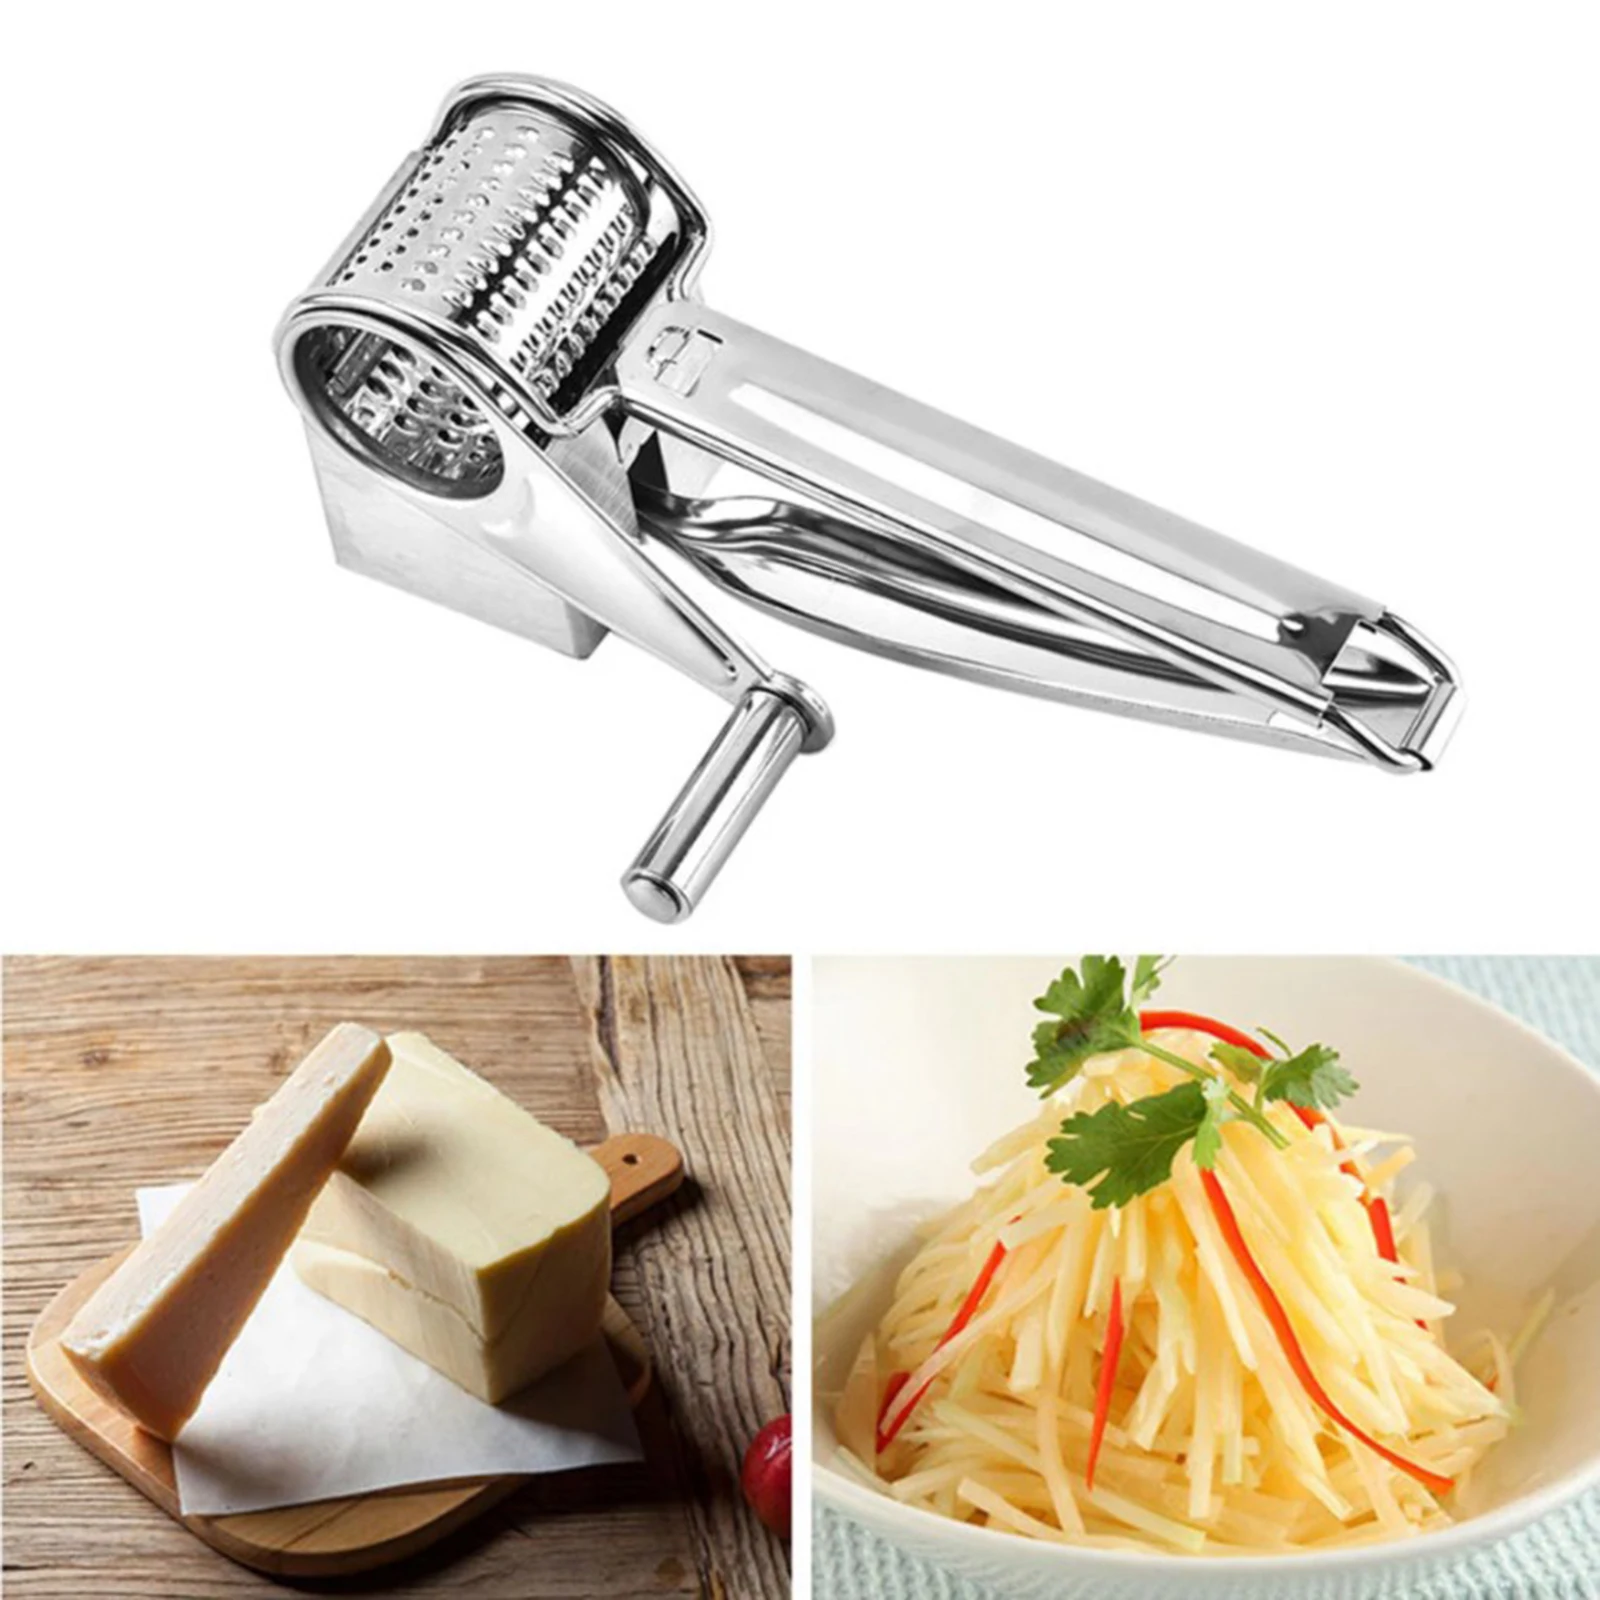 Professional Rotary Cheese Grater Cheese Cutter Slicer Shredder Dishwasher Safe